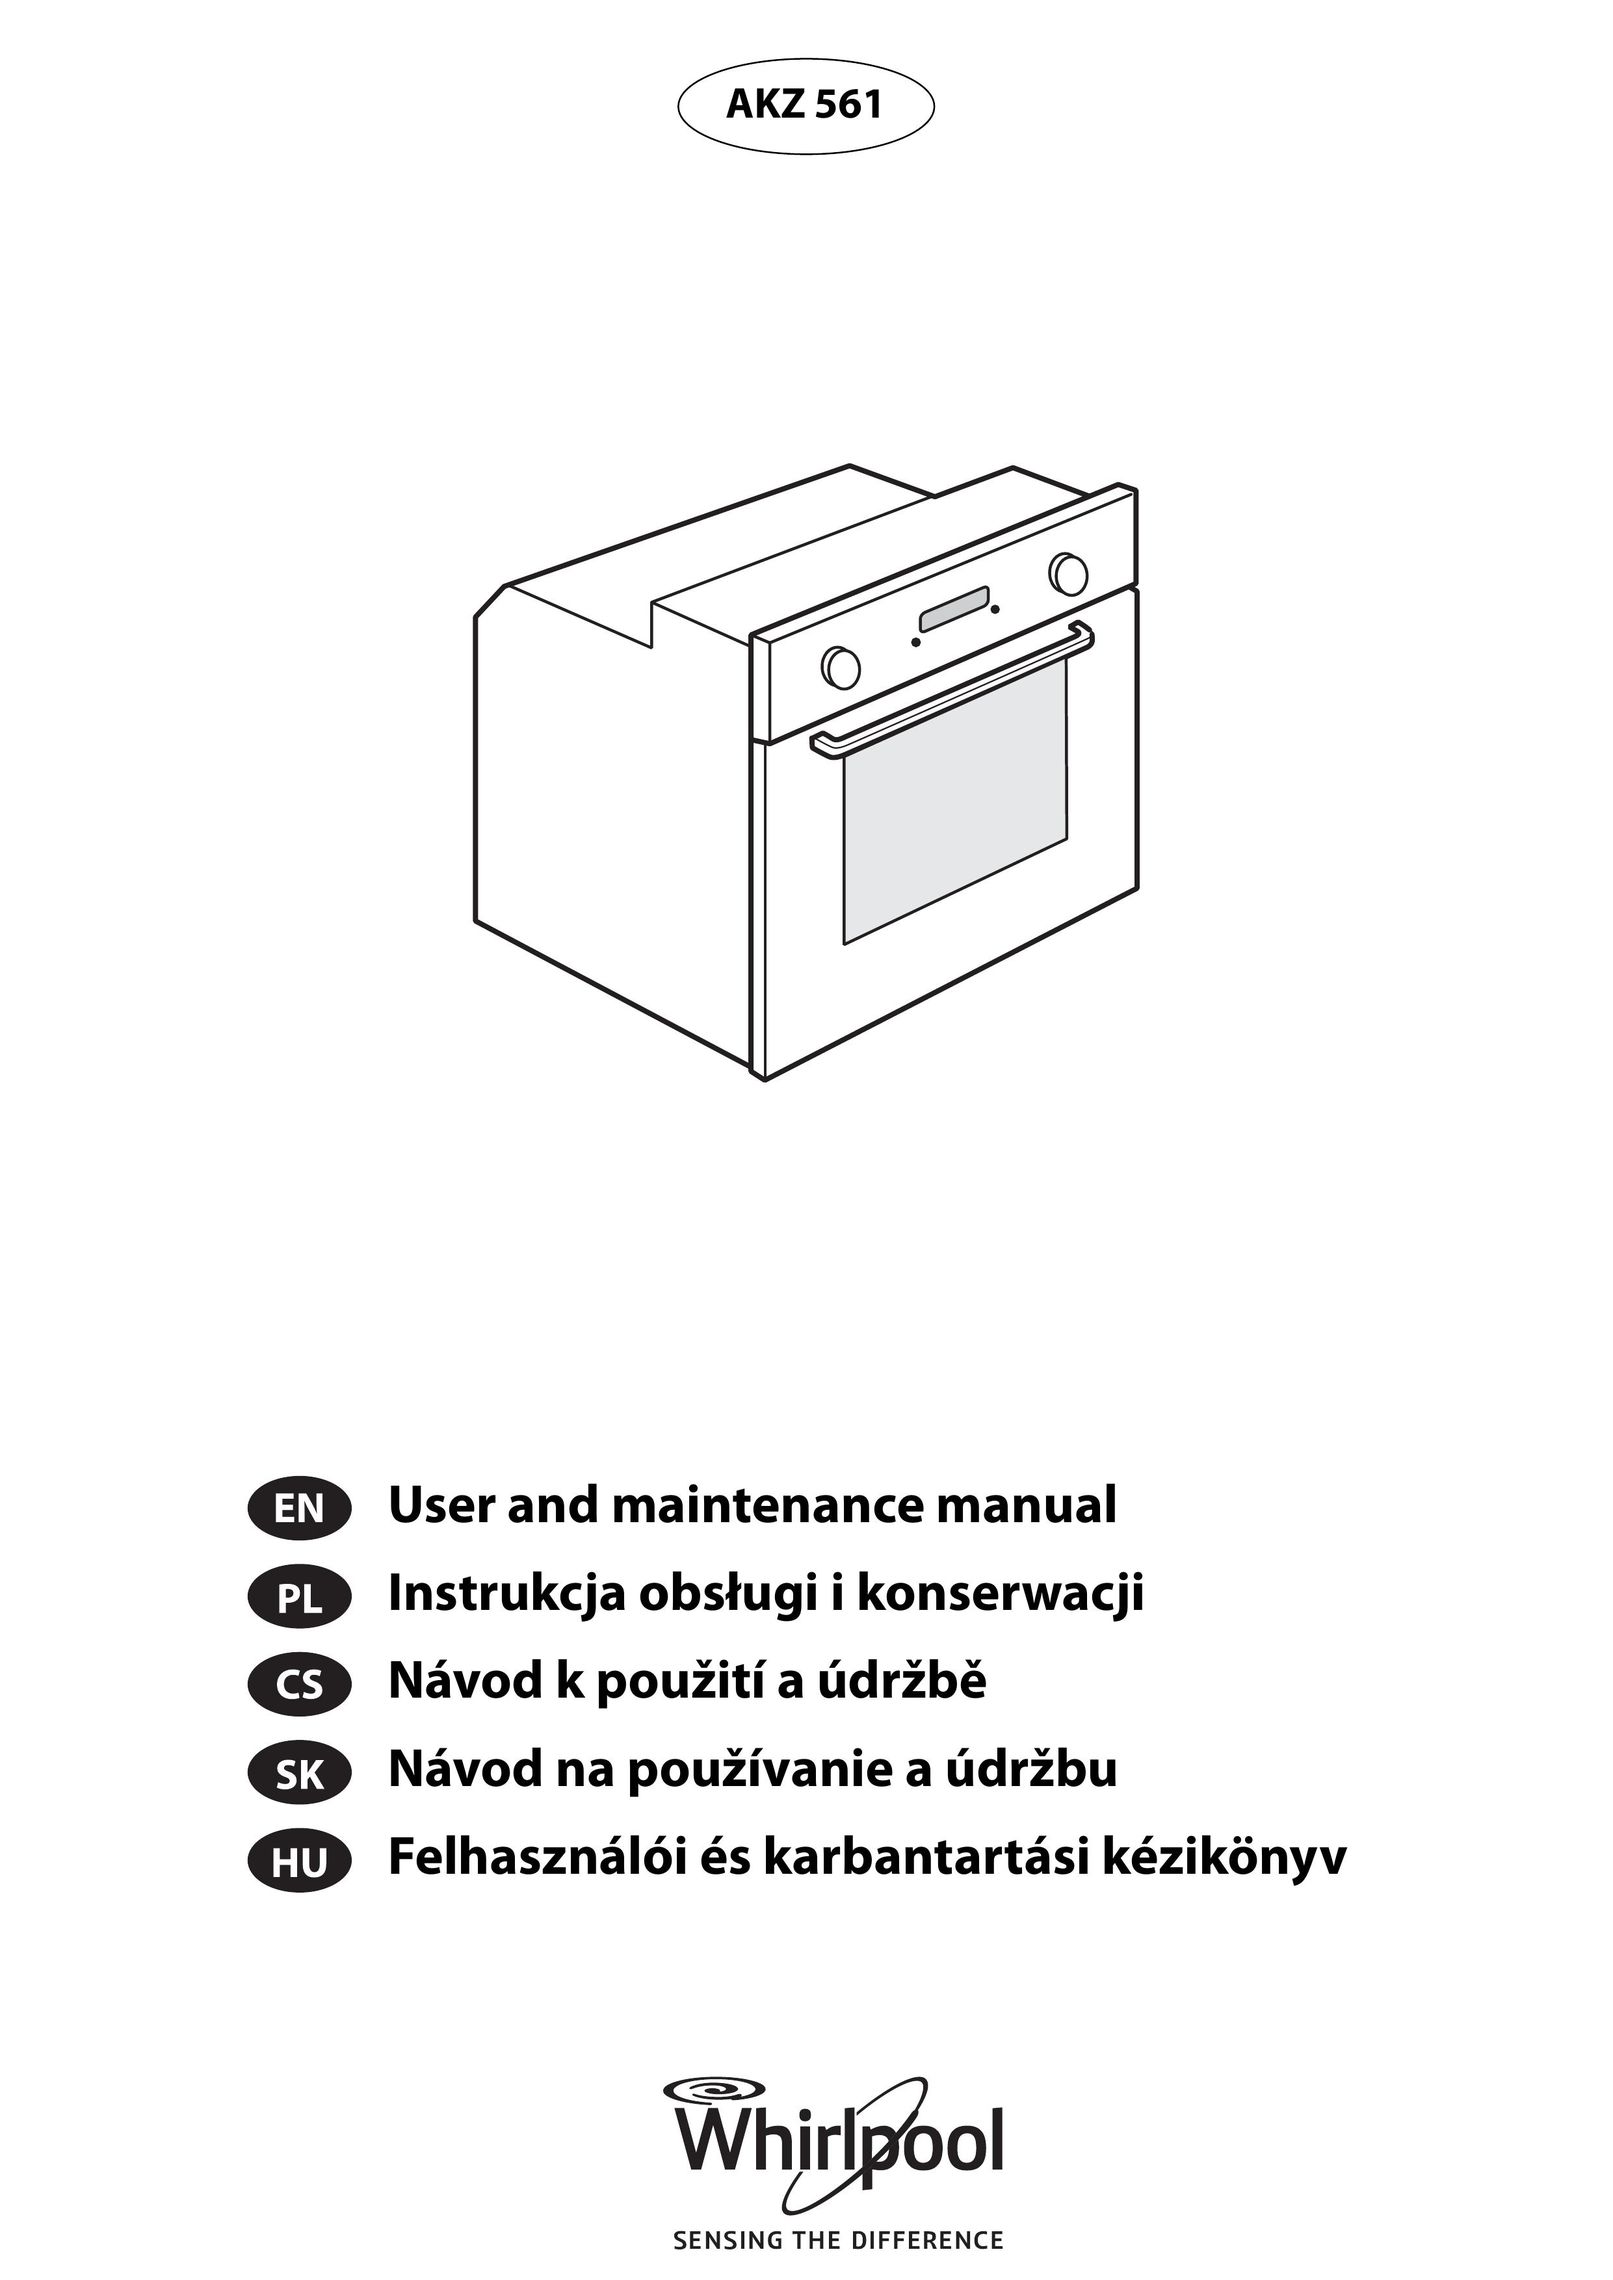 Whirlpool AKZ 561 Oven User Manual